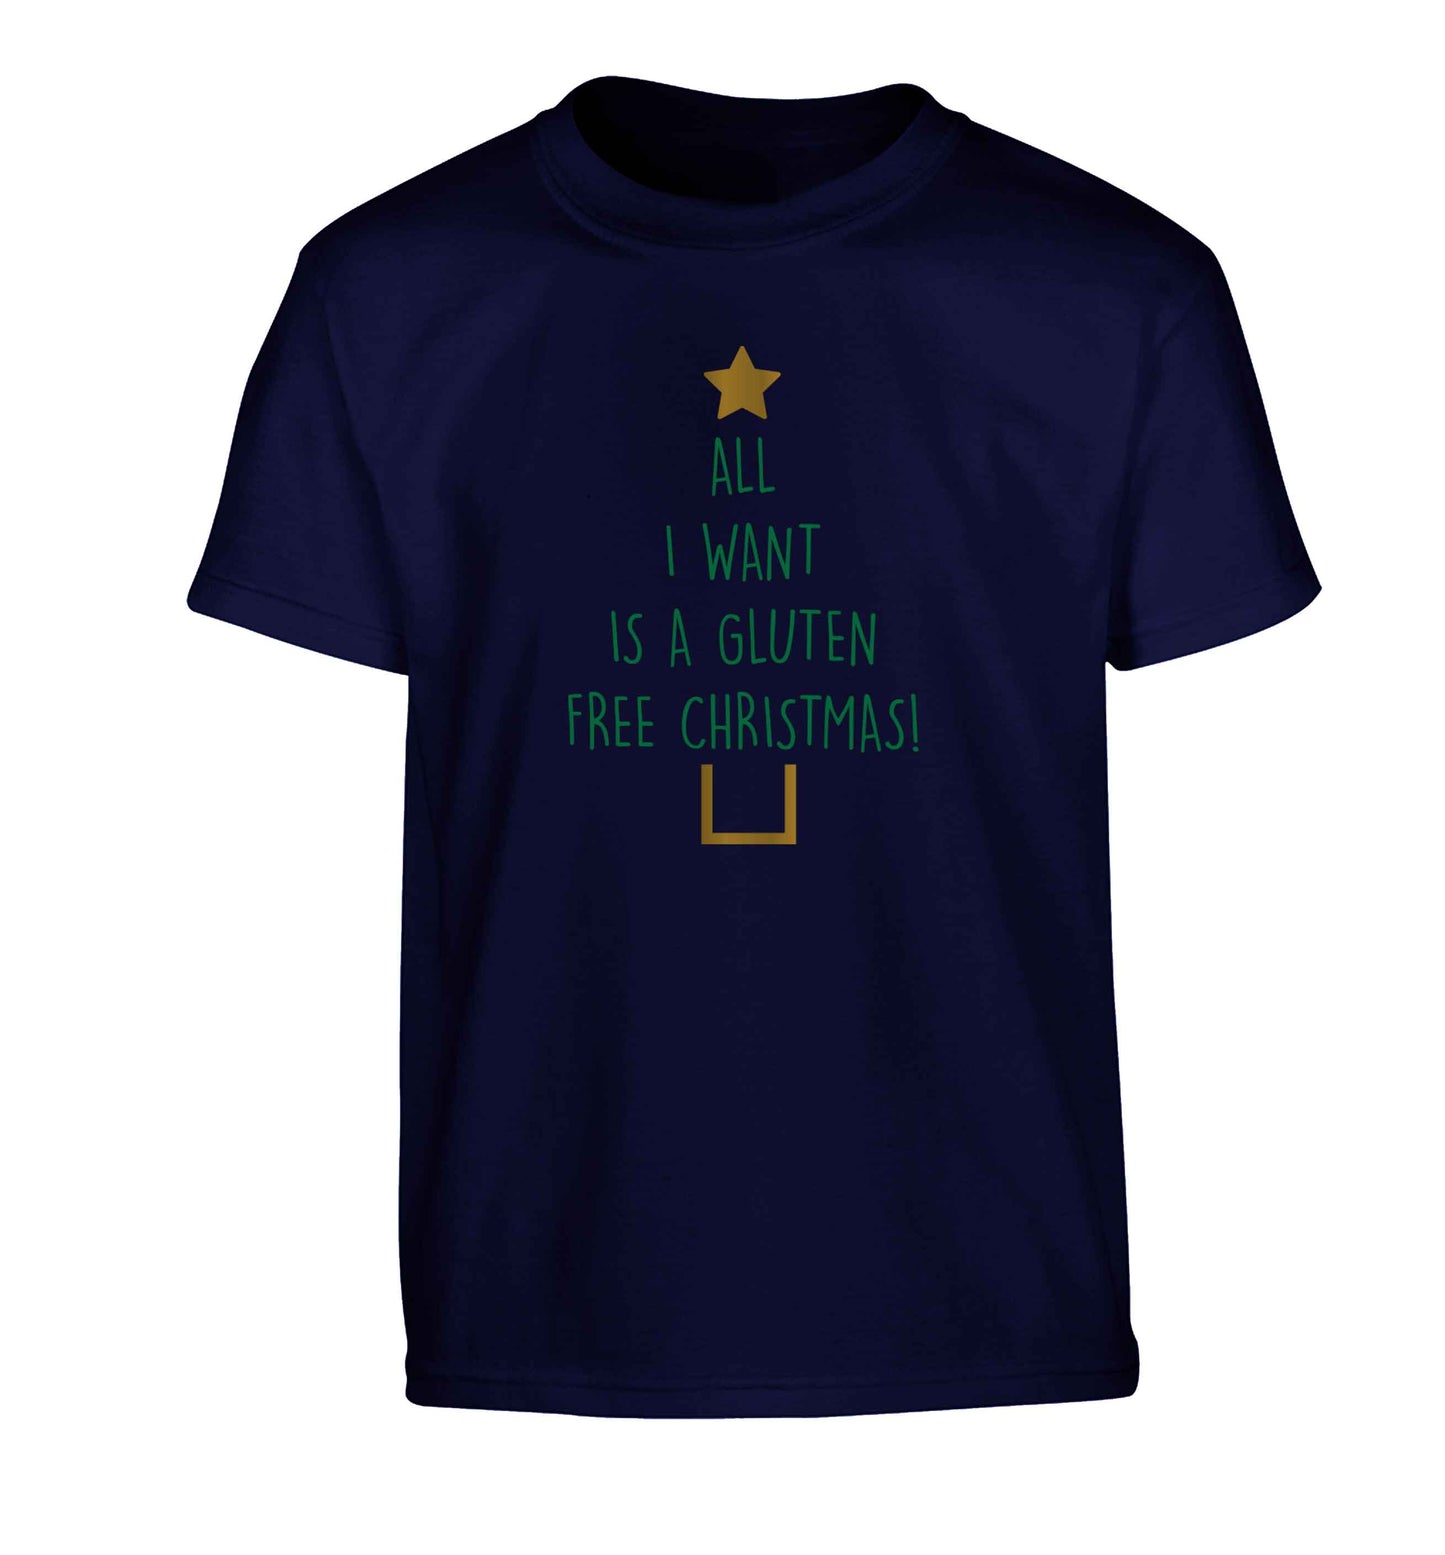 All I want is a gluten free Christmas Children's navy Tshirt 12-13 Years